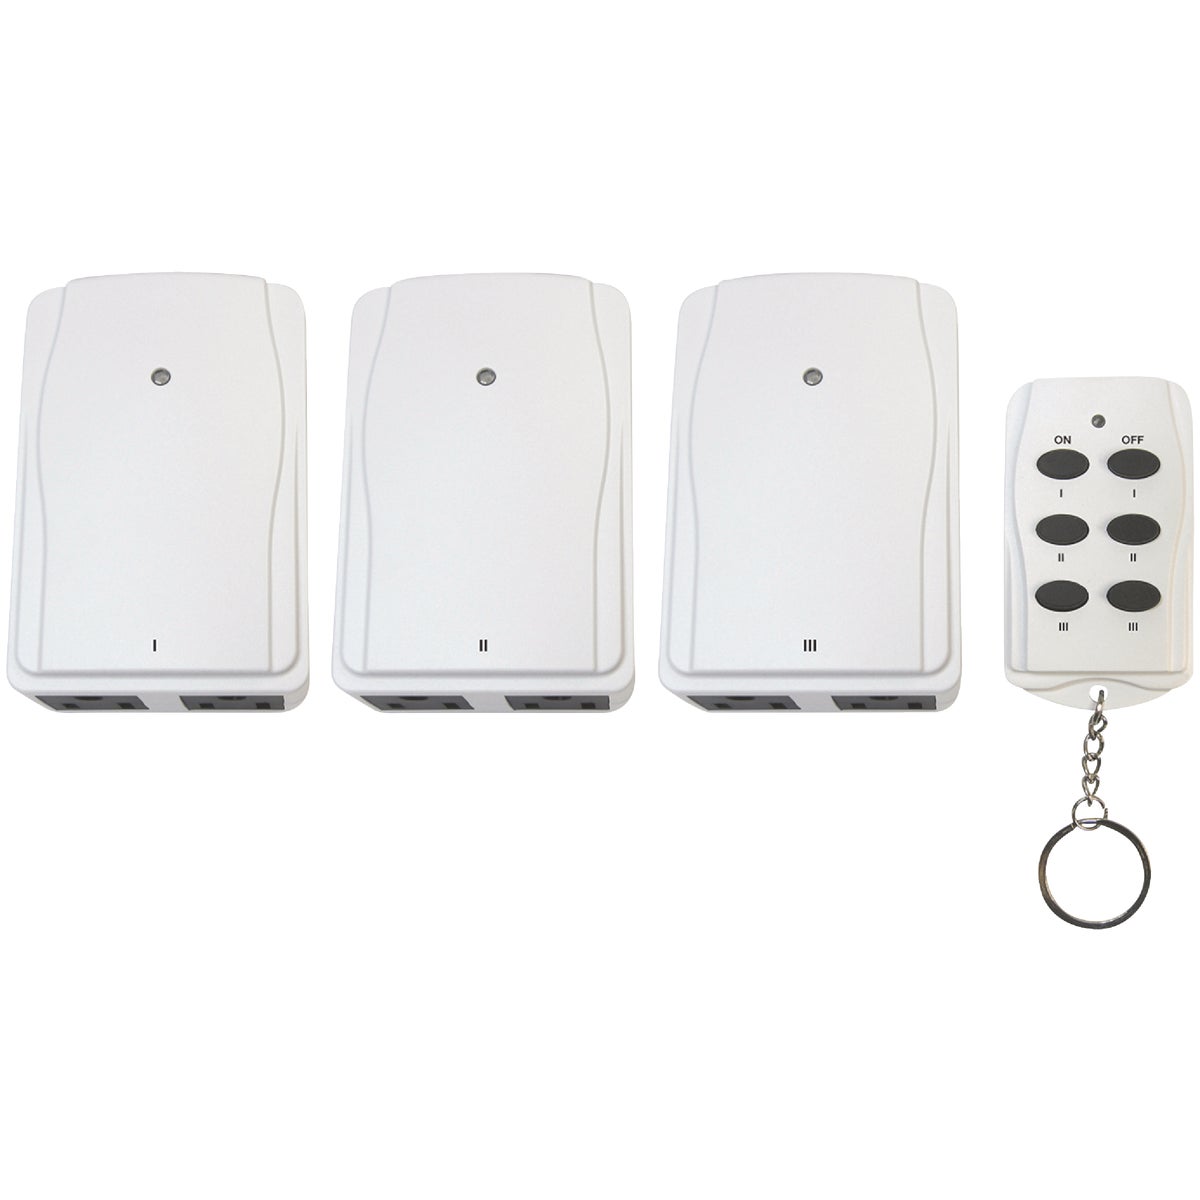 Prime 80 Ft. Range White Wireless Switch with Remote Control (3-Pack)